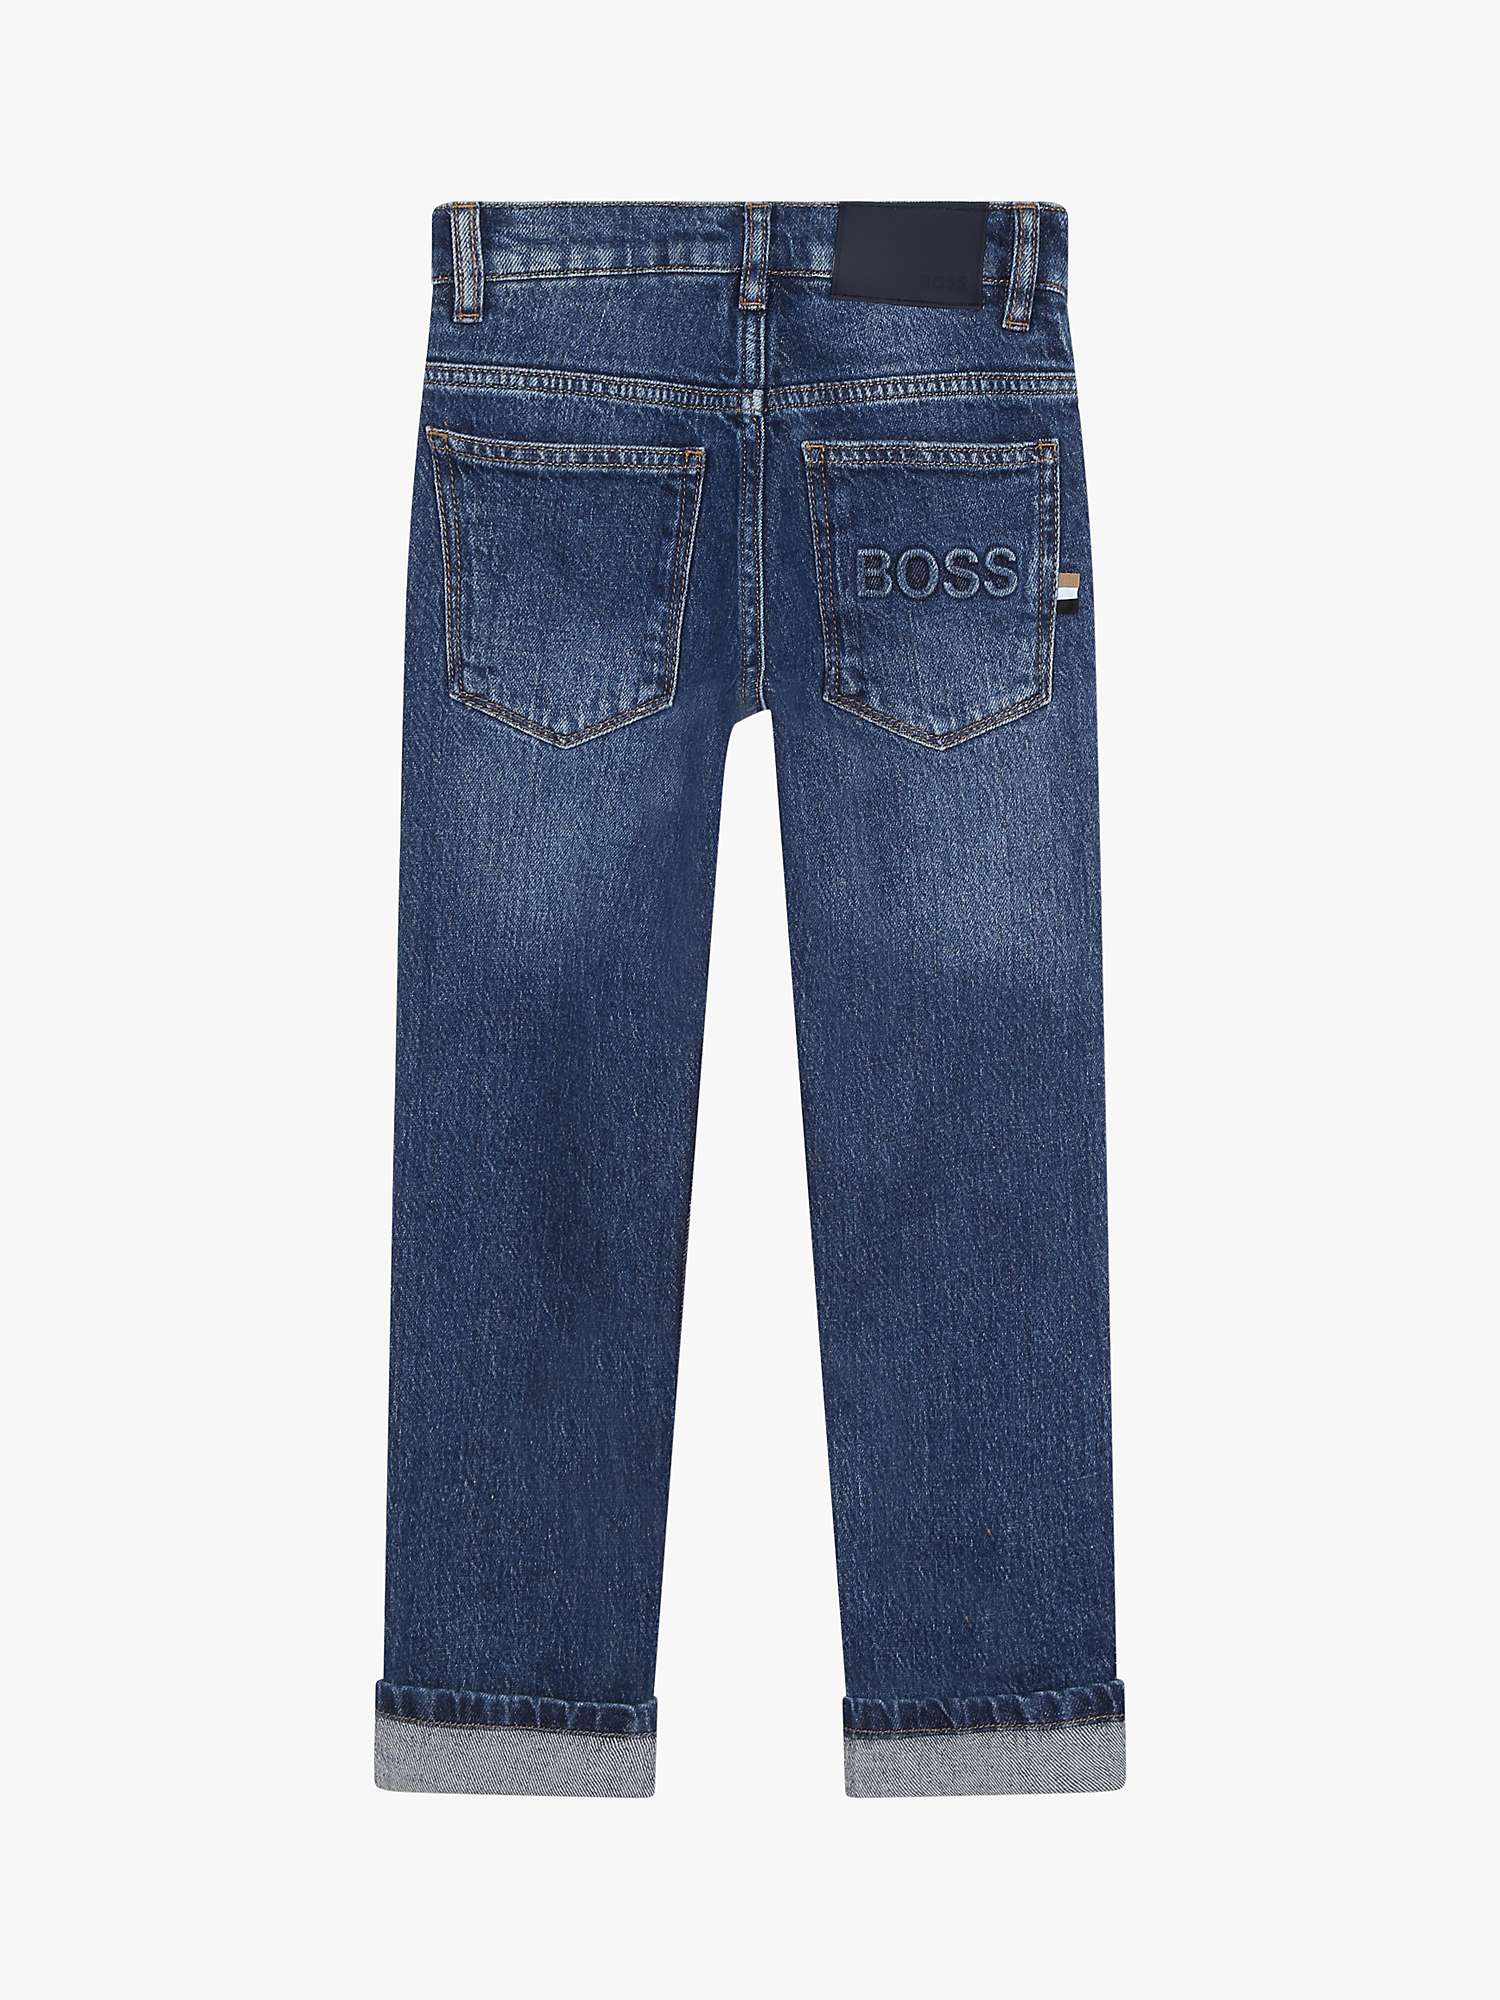 Buy BOSS Kids' Straight Fit Jeans, Blue Online at johnlewis.com